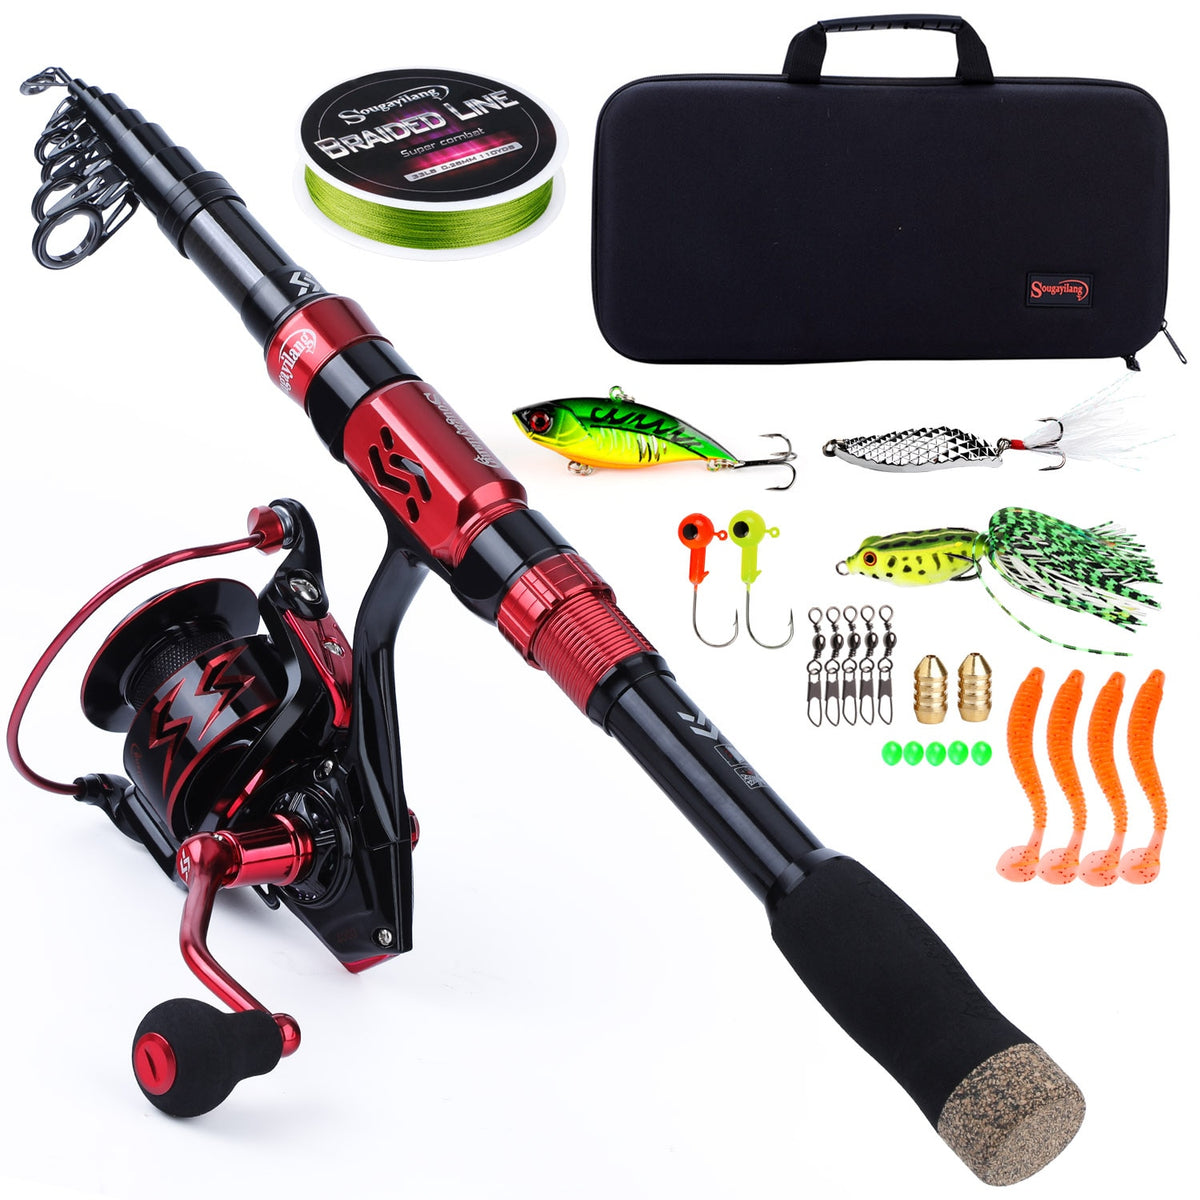 Telescopic fishing rod - The best products with free shipping